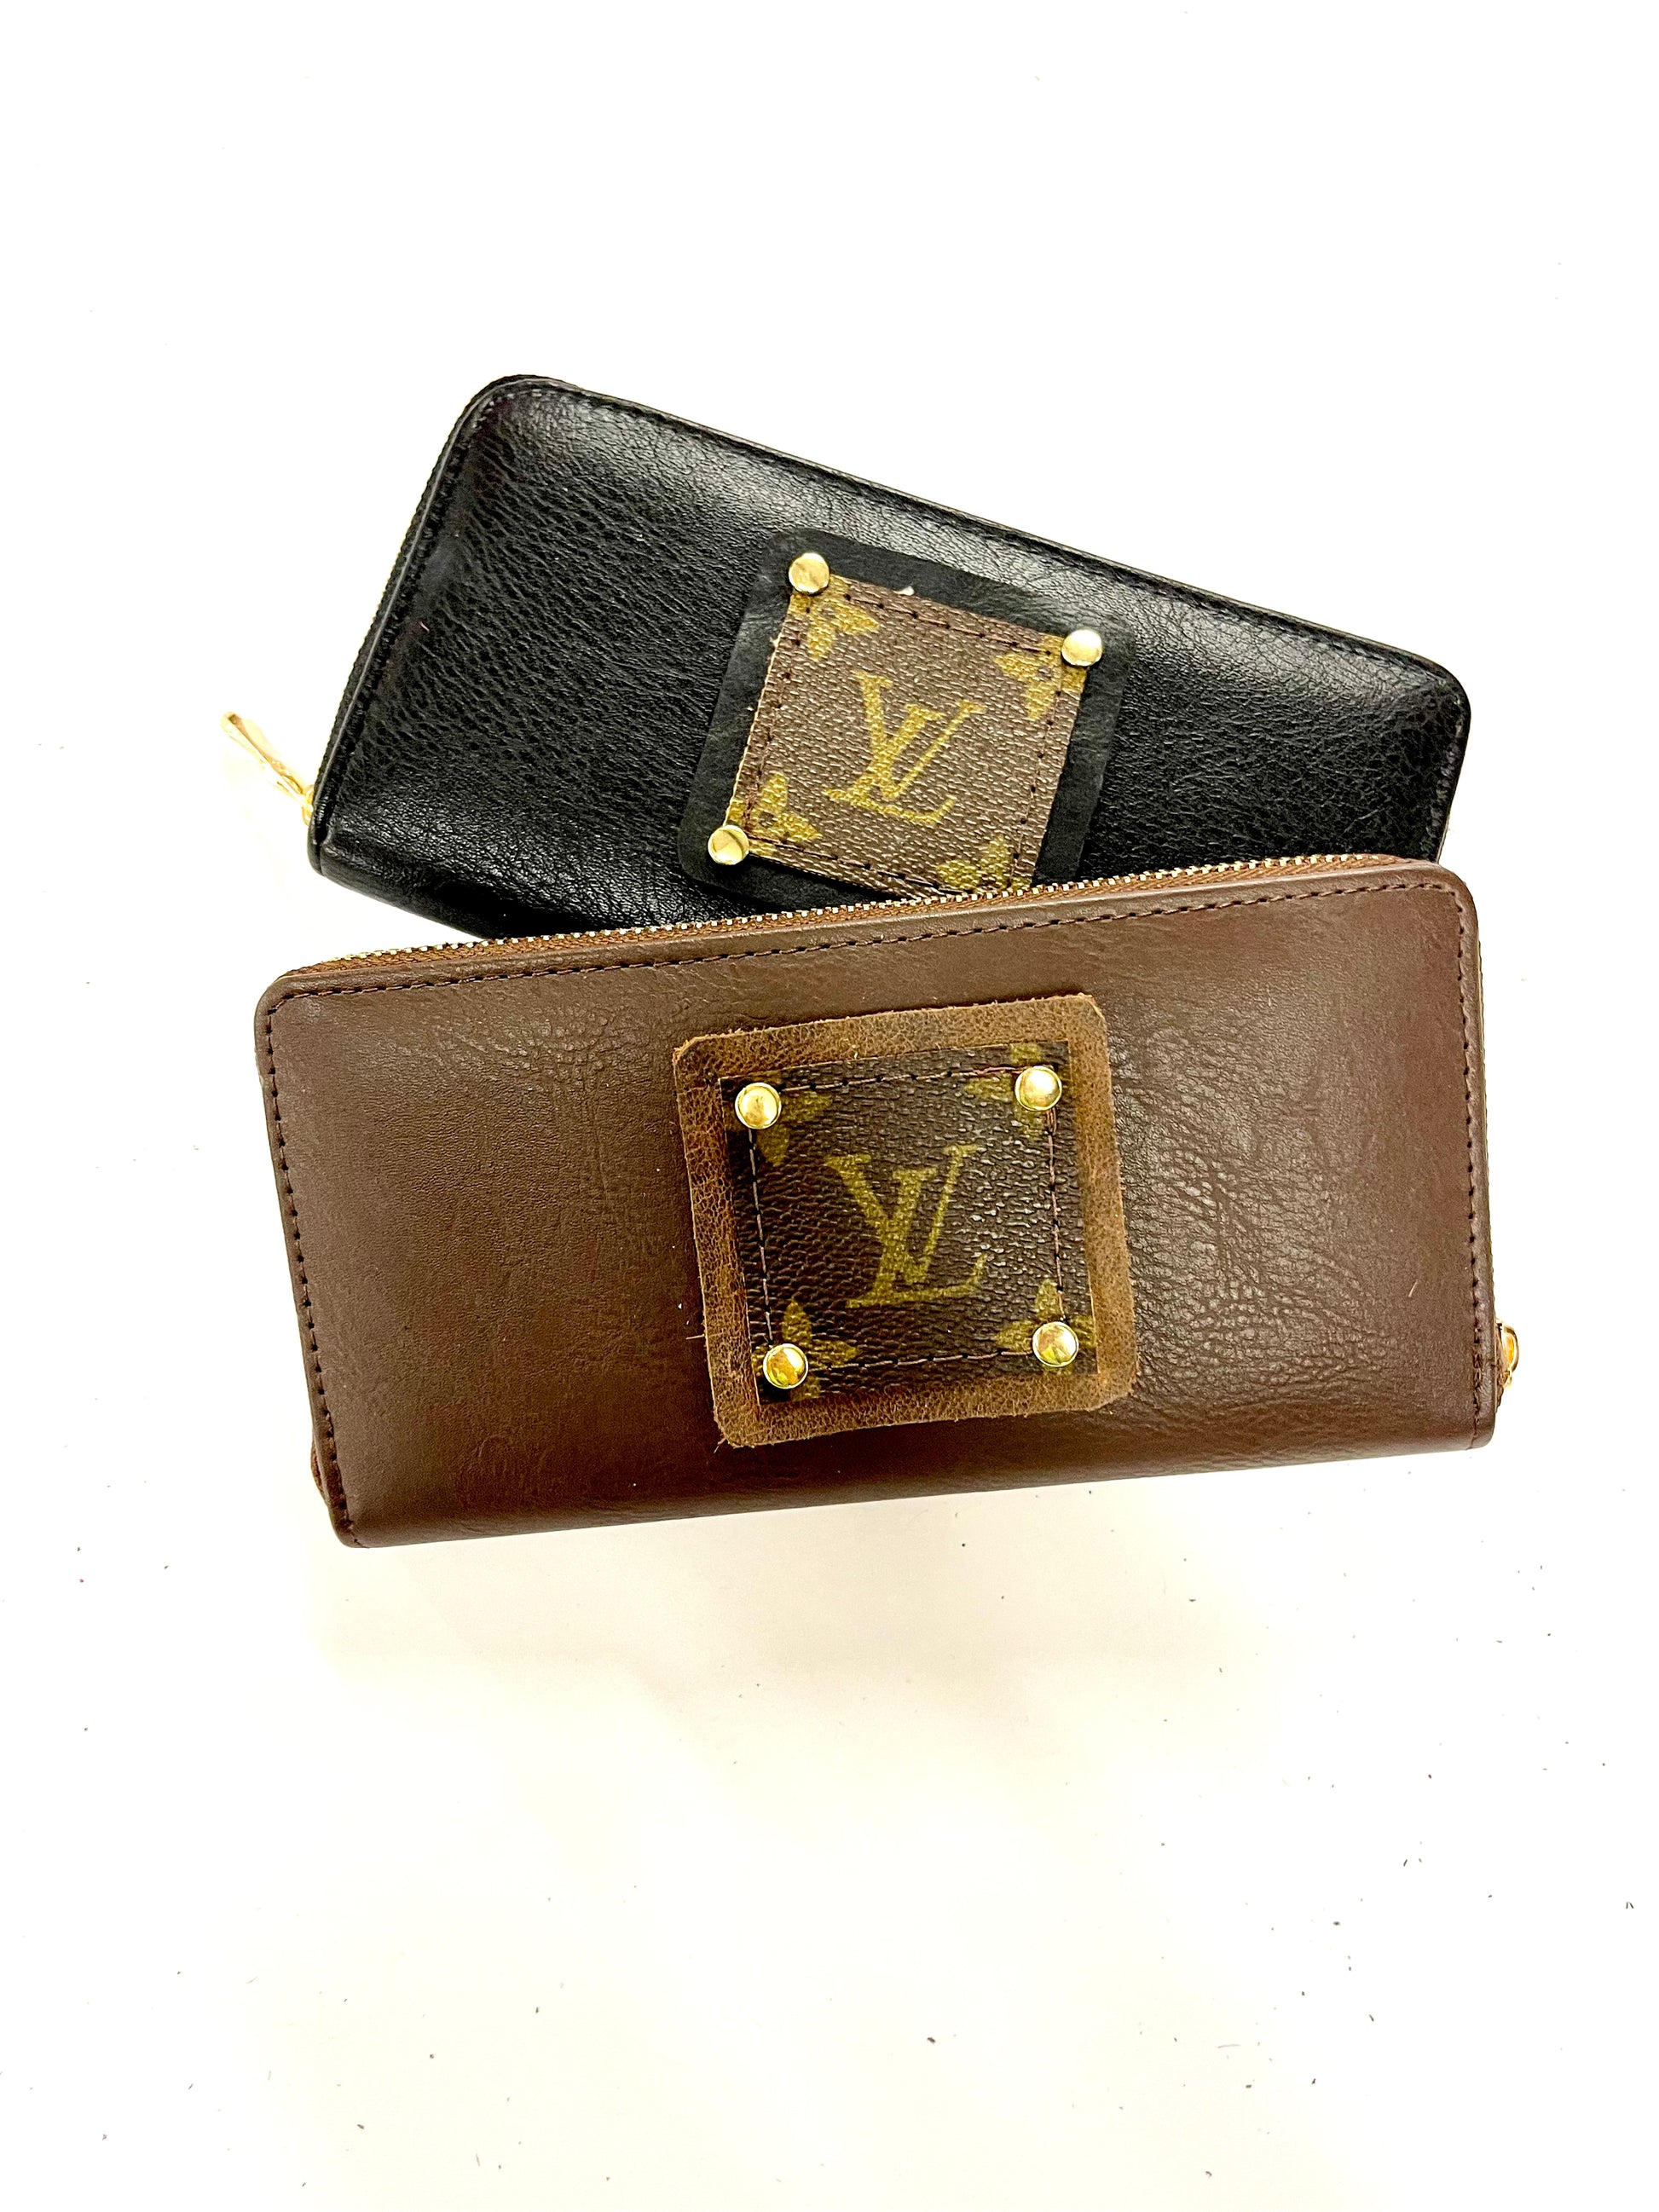 Single Wallet in Brown (brown patch, gold hardware) - Patches Of Upcycling